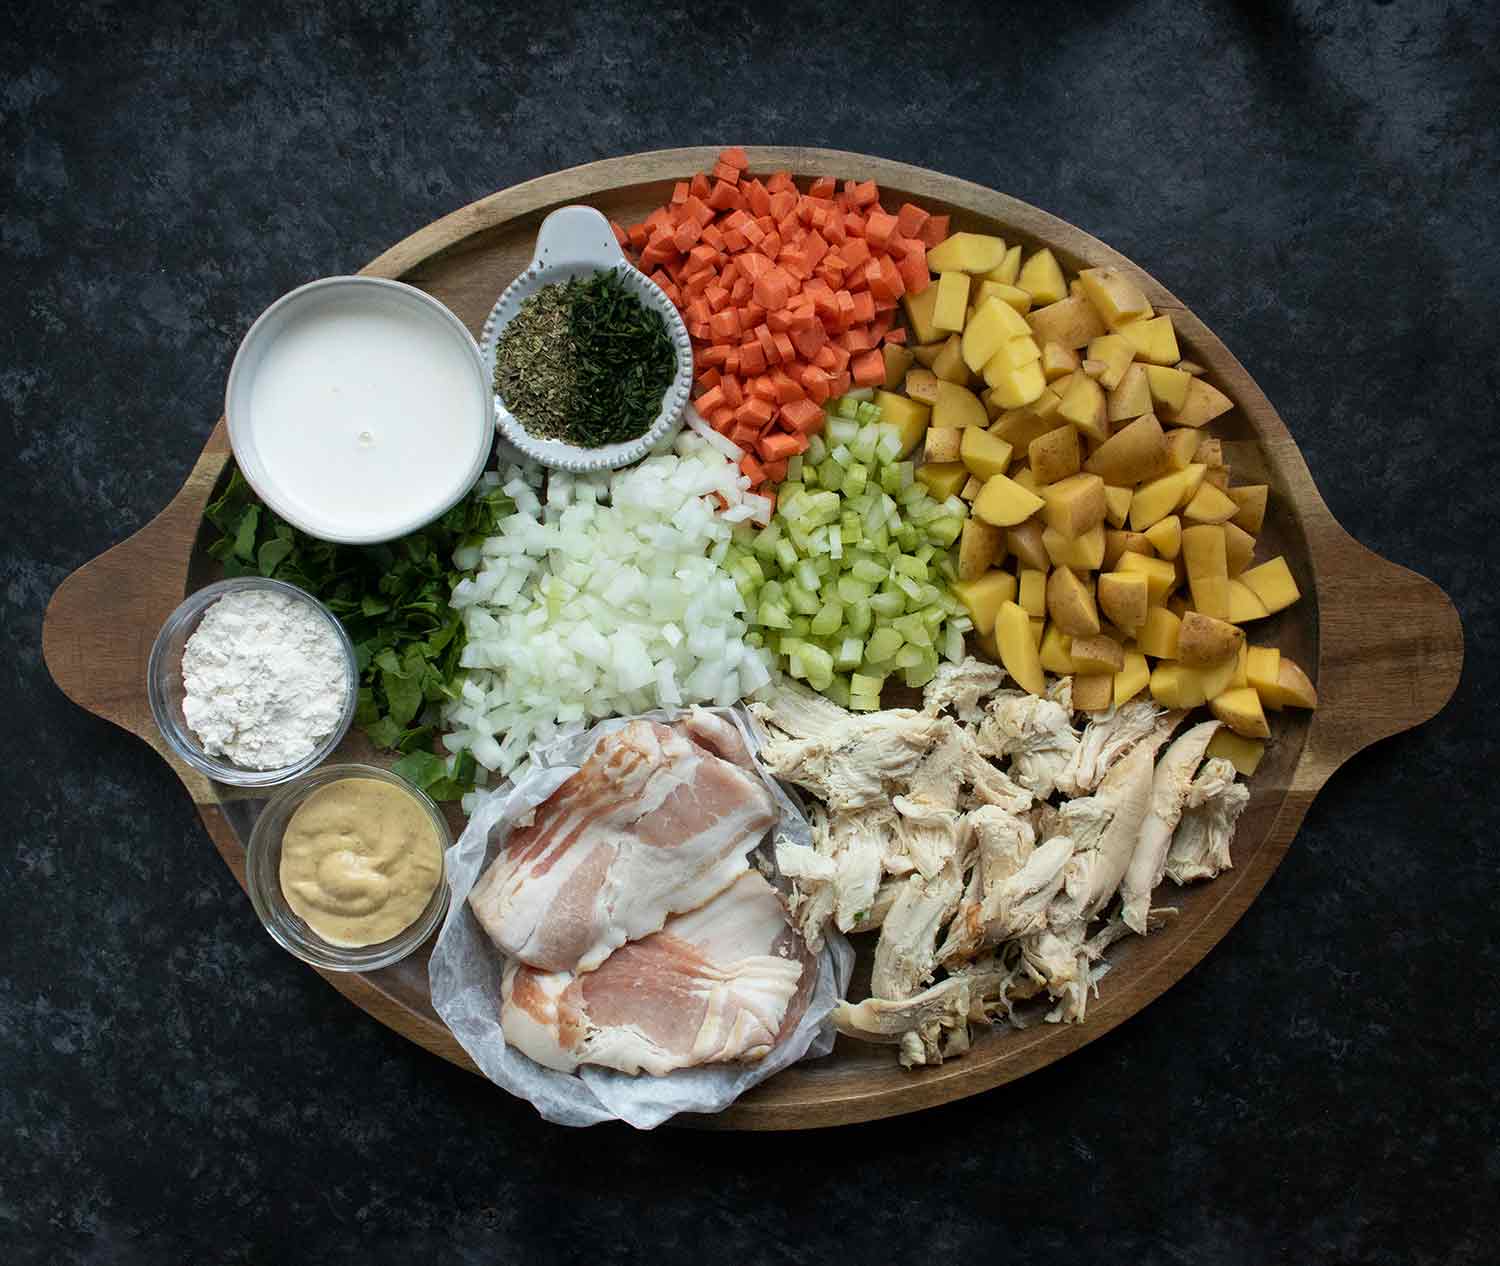 Ingredients for Chicken Potato Soup arranged on a platter.